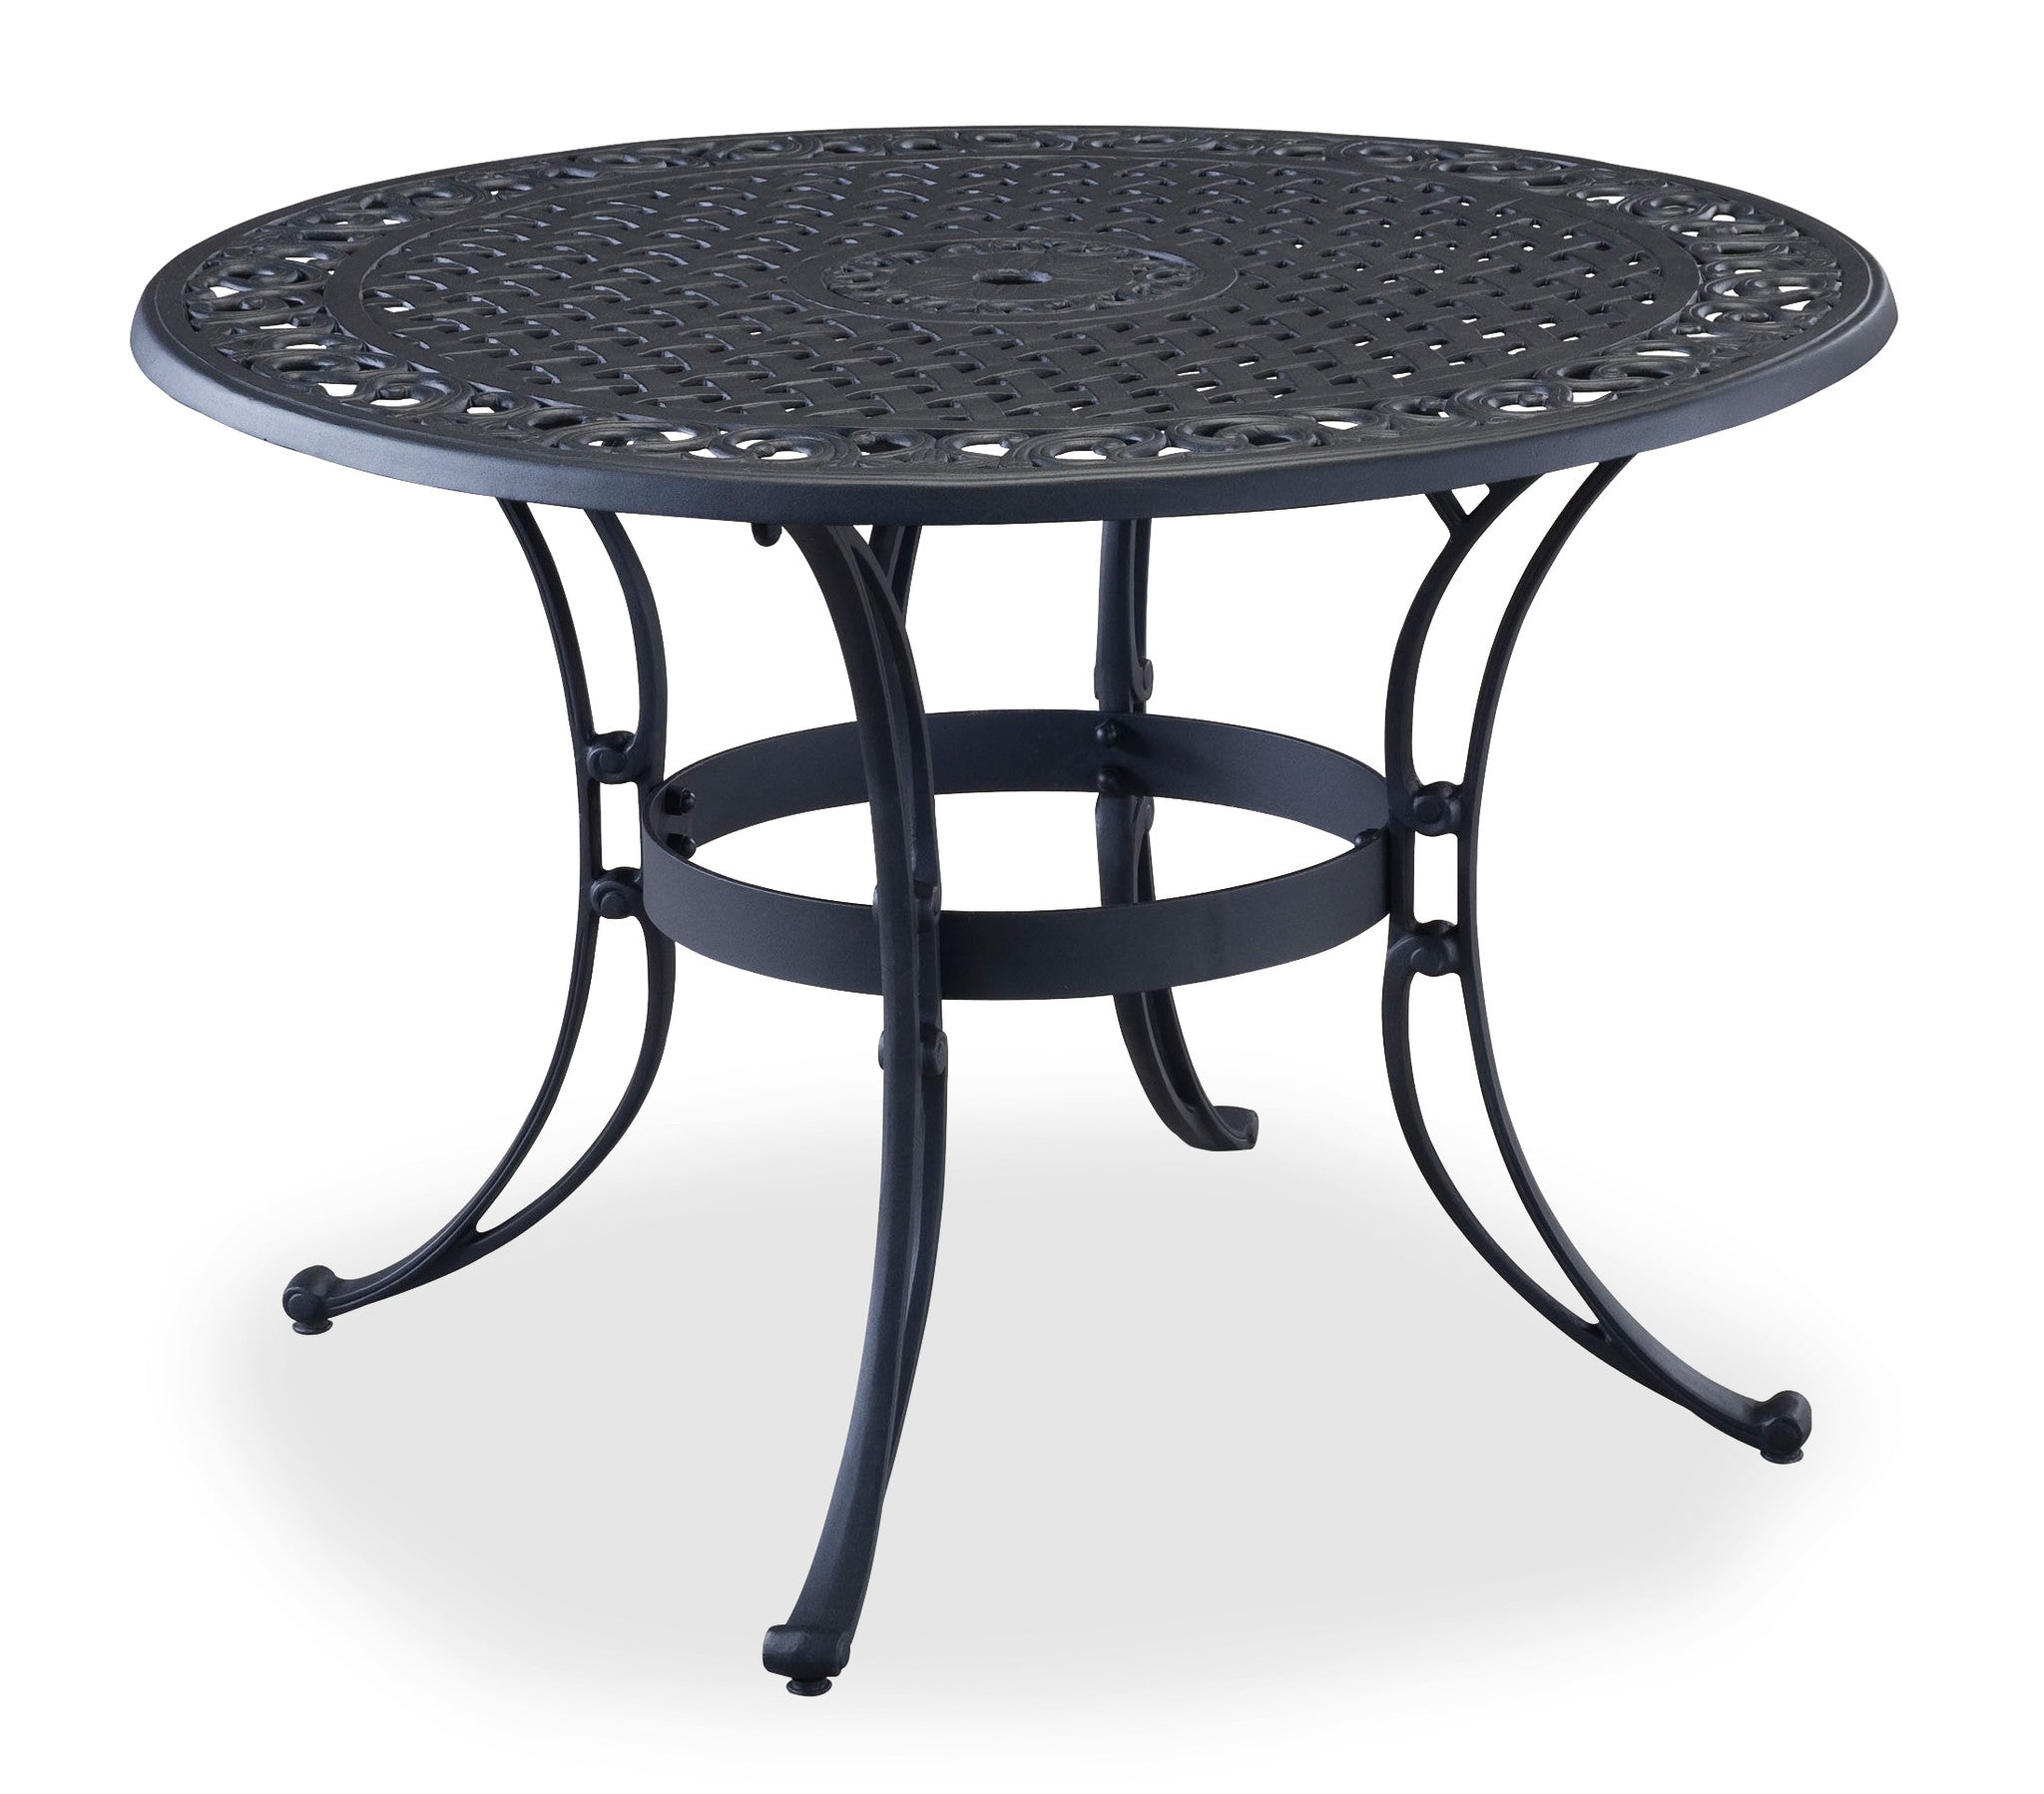 Sanibel 6 Piece Outdoor Dining Set by Homestyles - Black - Aluminum, Cast Iron, Upholstered, Fabric - 6654-3086C